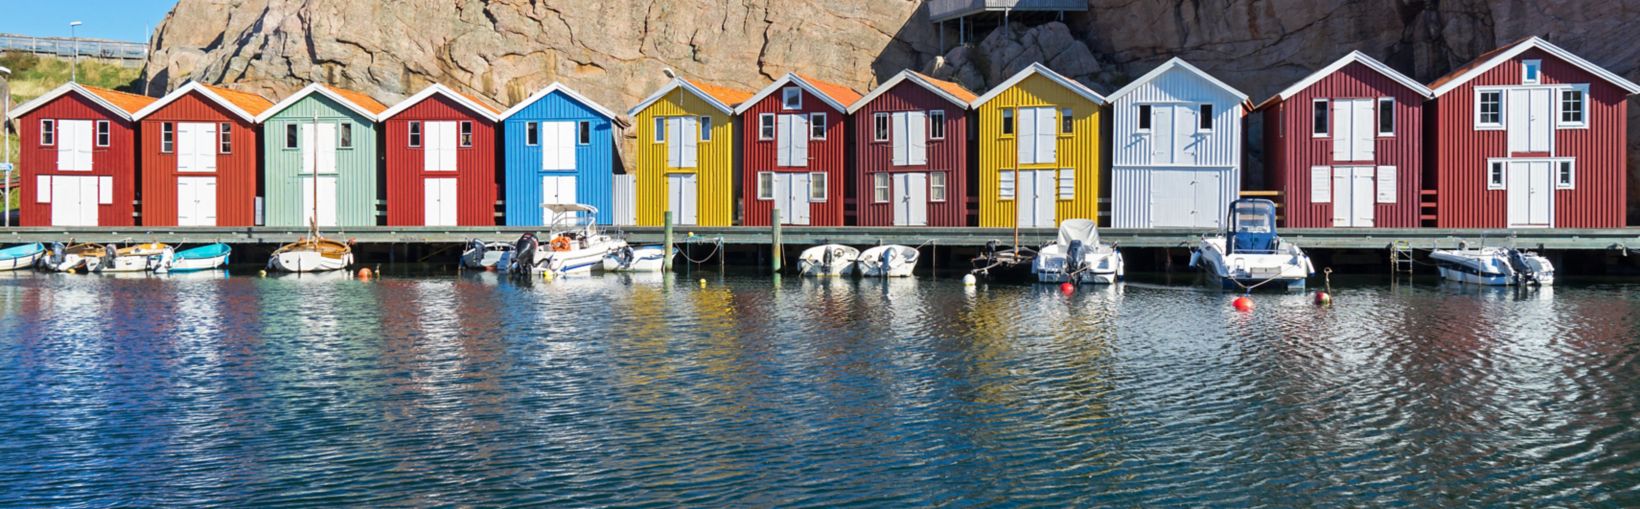 Colourful fishing huts in Smögen, Sweden